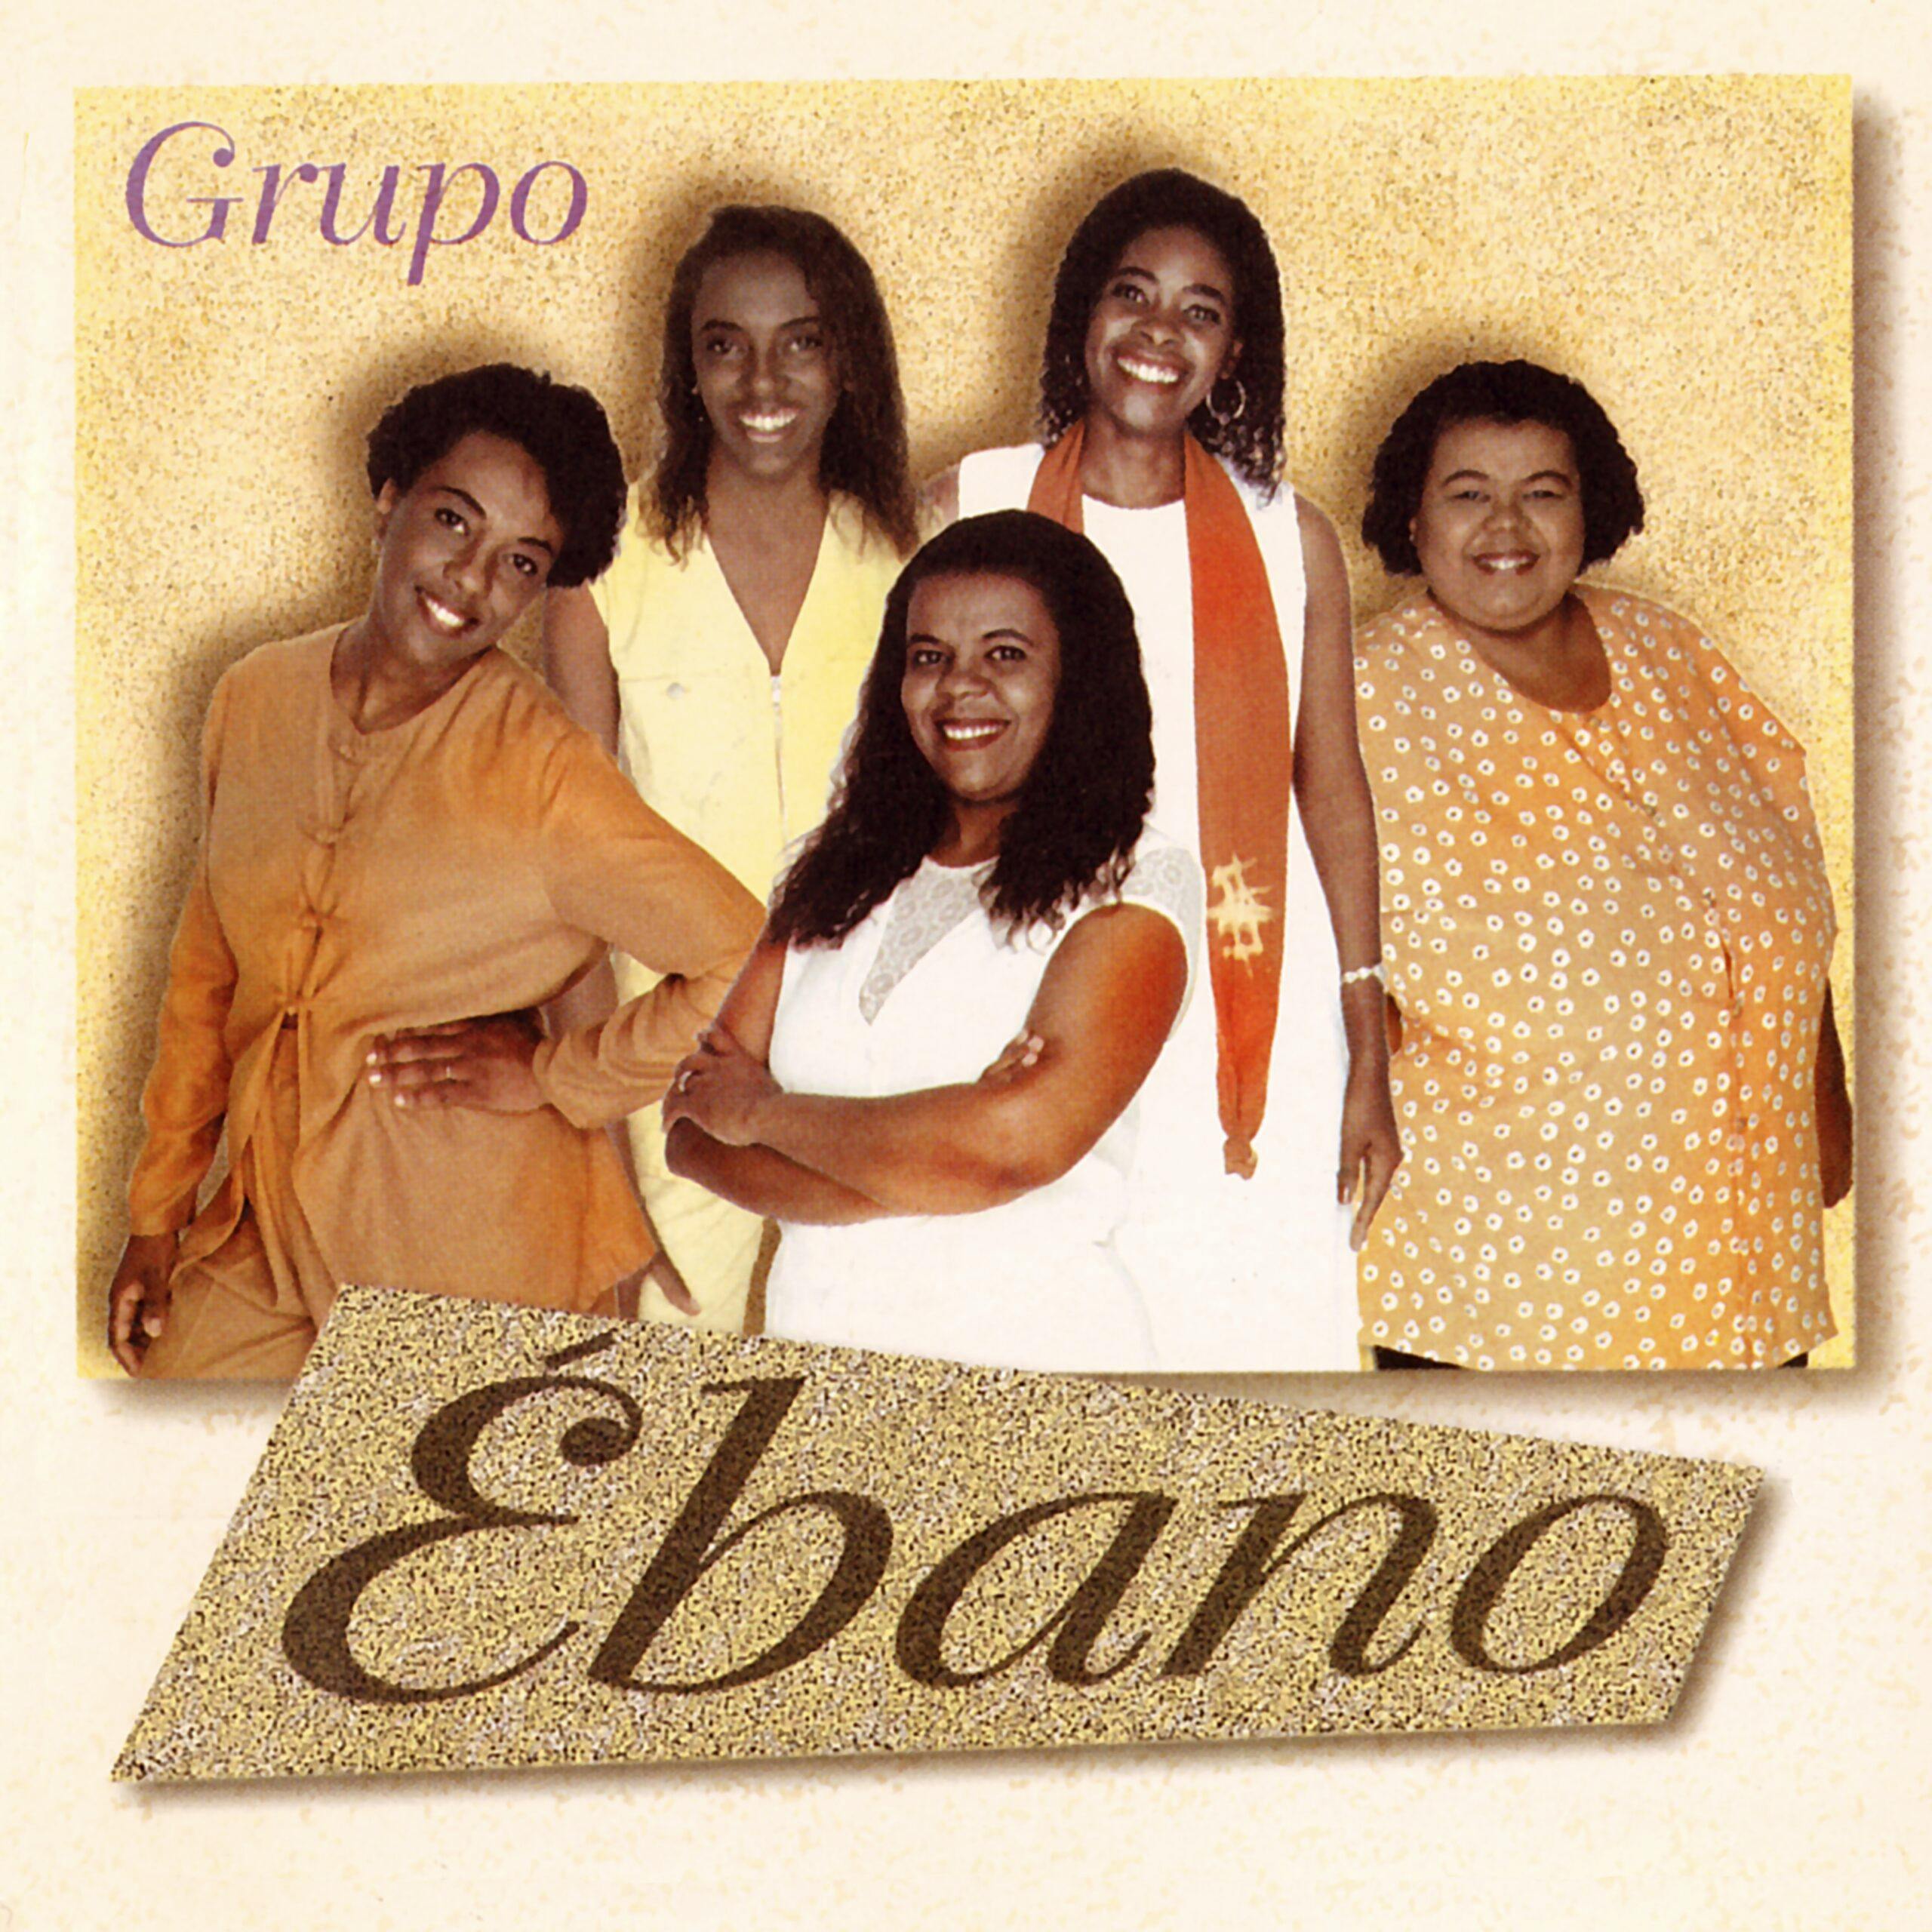 This self-titled album by Rio's Grupo Ébano, an all-female gospel vocal group, was originally released on CD only in 1997 on a small independent label and in small quantities. The songs, all originals from the pen of group leader (and backing vocalist to the stars) Gil Miranda, are richly melodic and sophisticated in the mode of all the 60s and 70s Brazilian classics (think Quarteto Em Cy) while their positive spiritual message is more reminiscent of the Clark Sisters if they sang in Portuguese.